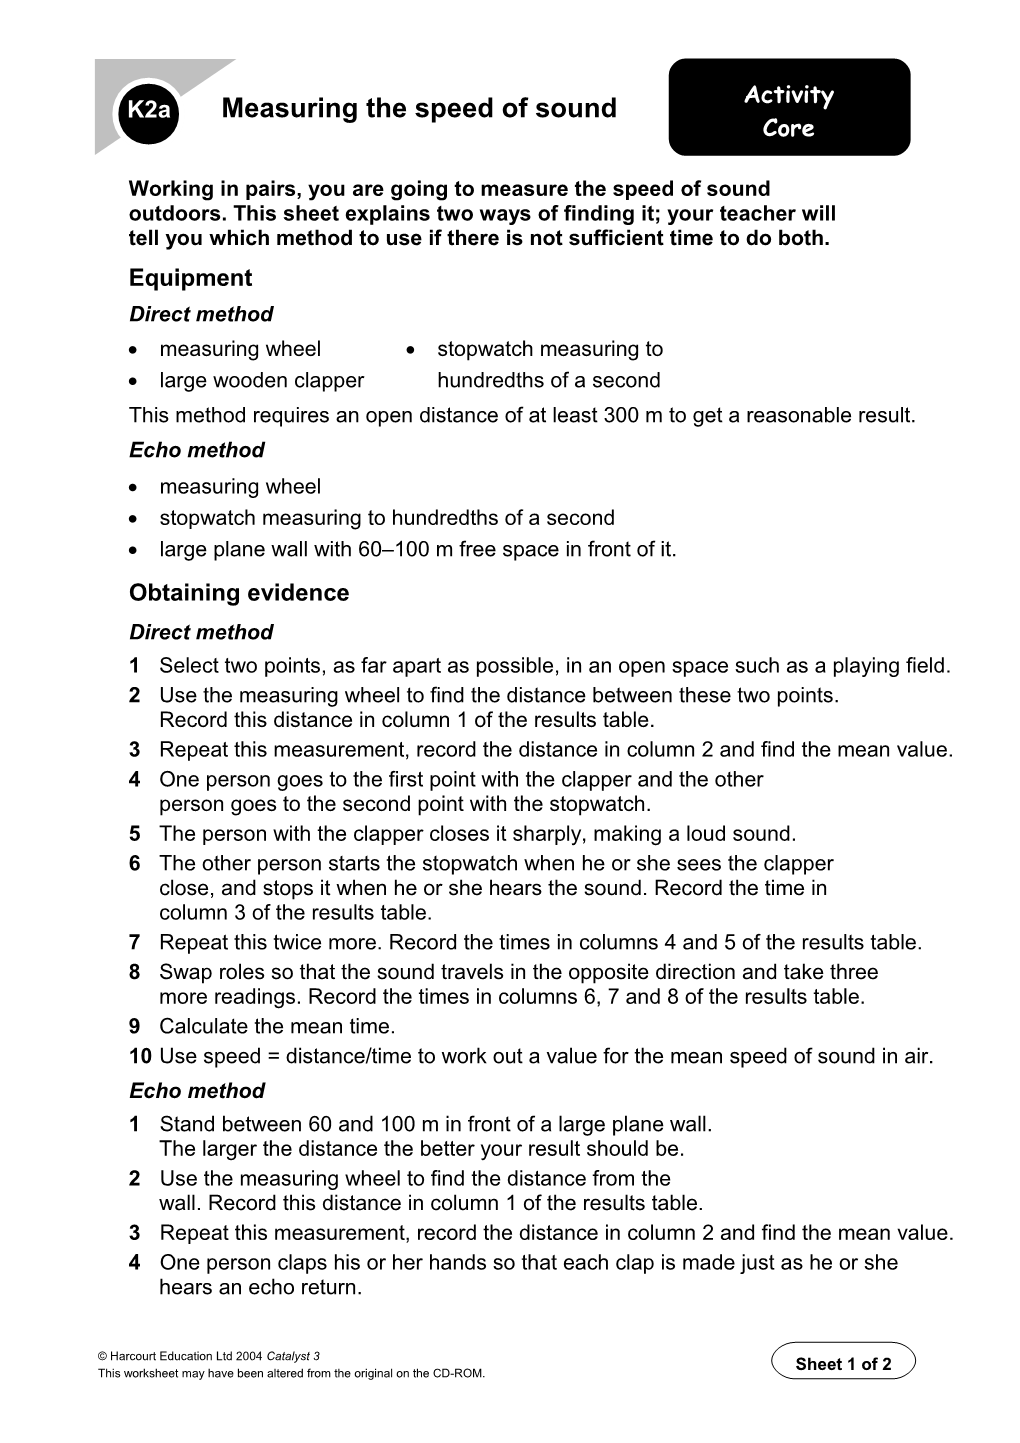 Working in Pairs, You Are Going to Measure the Speed of Sound Outdoors. This Sheet Explains